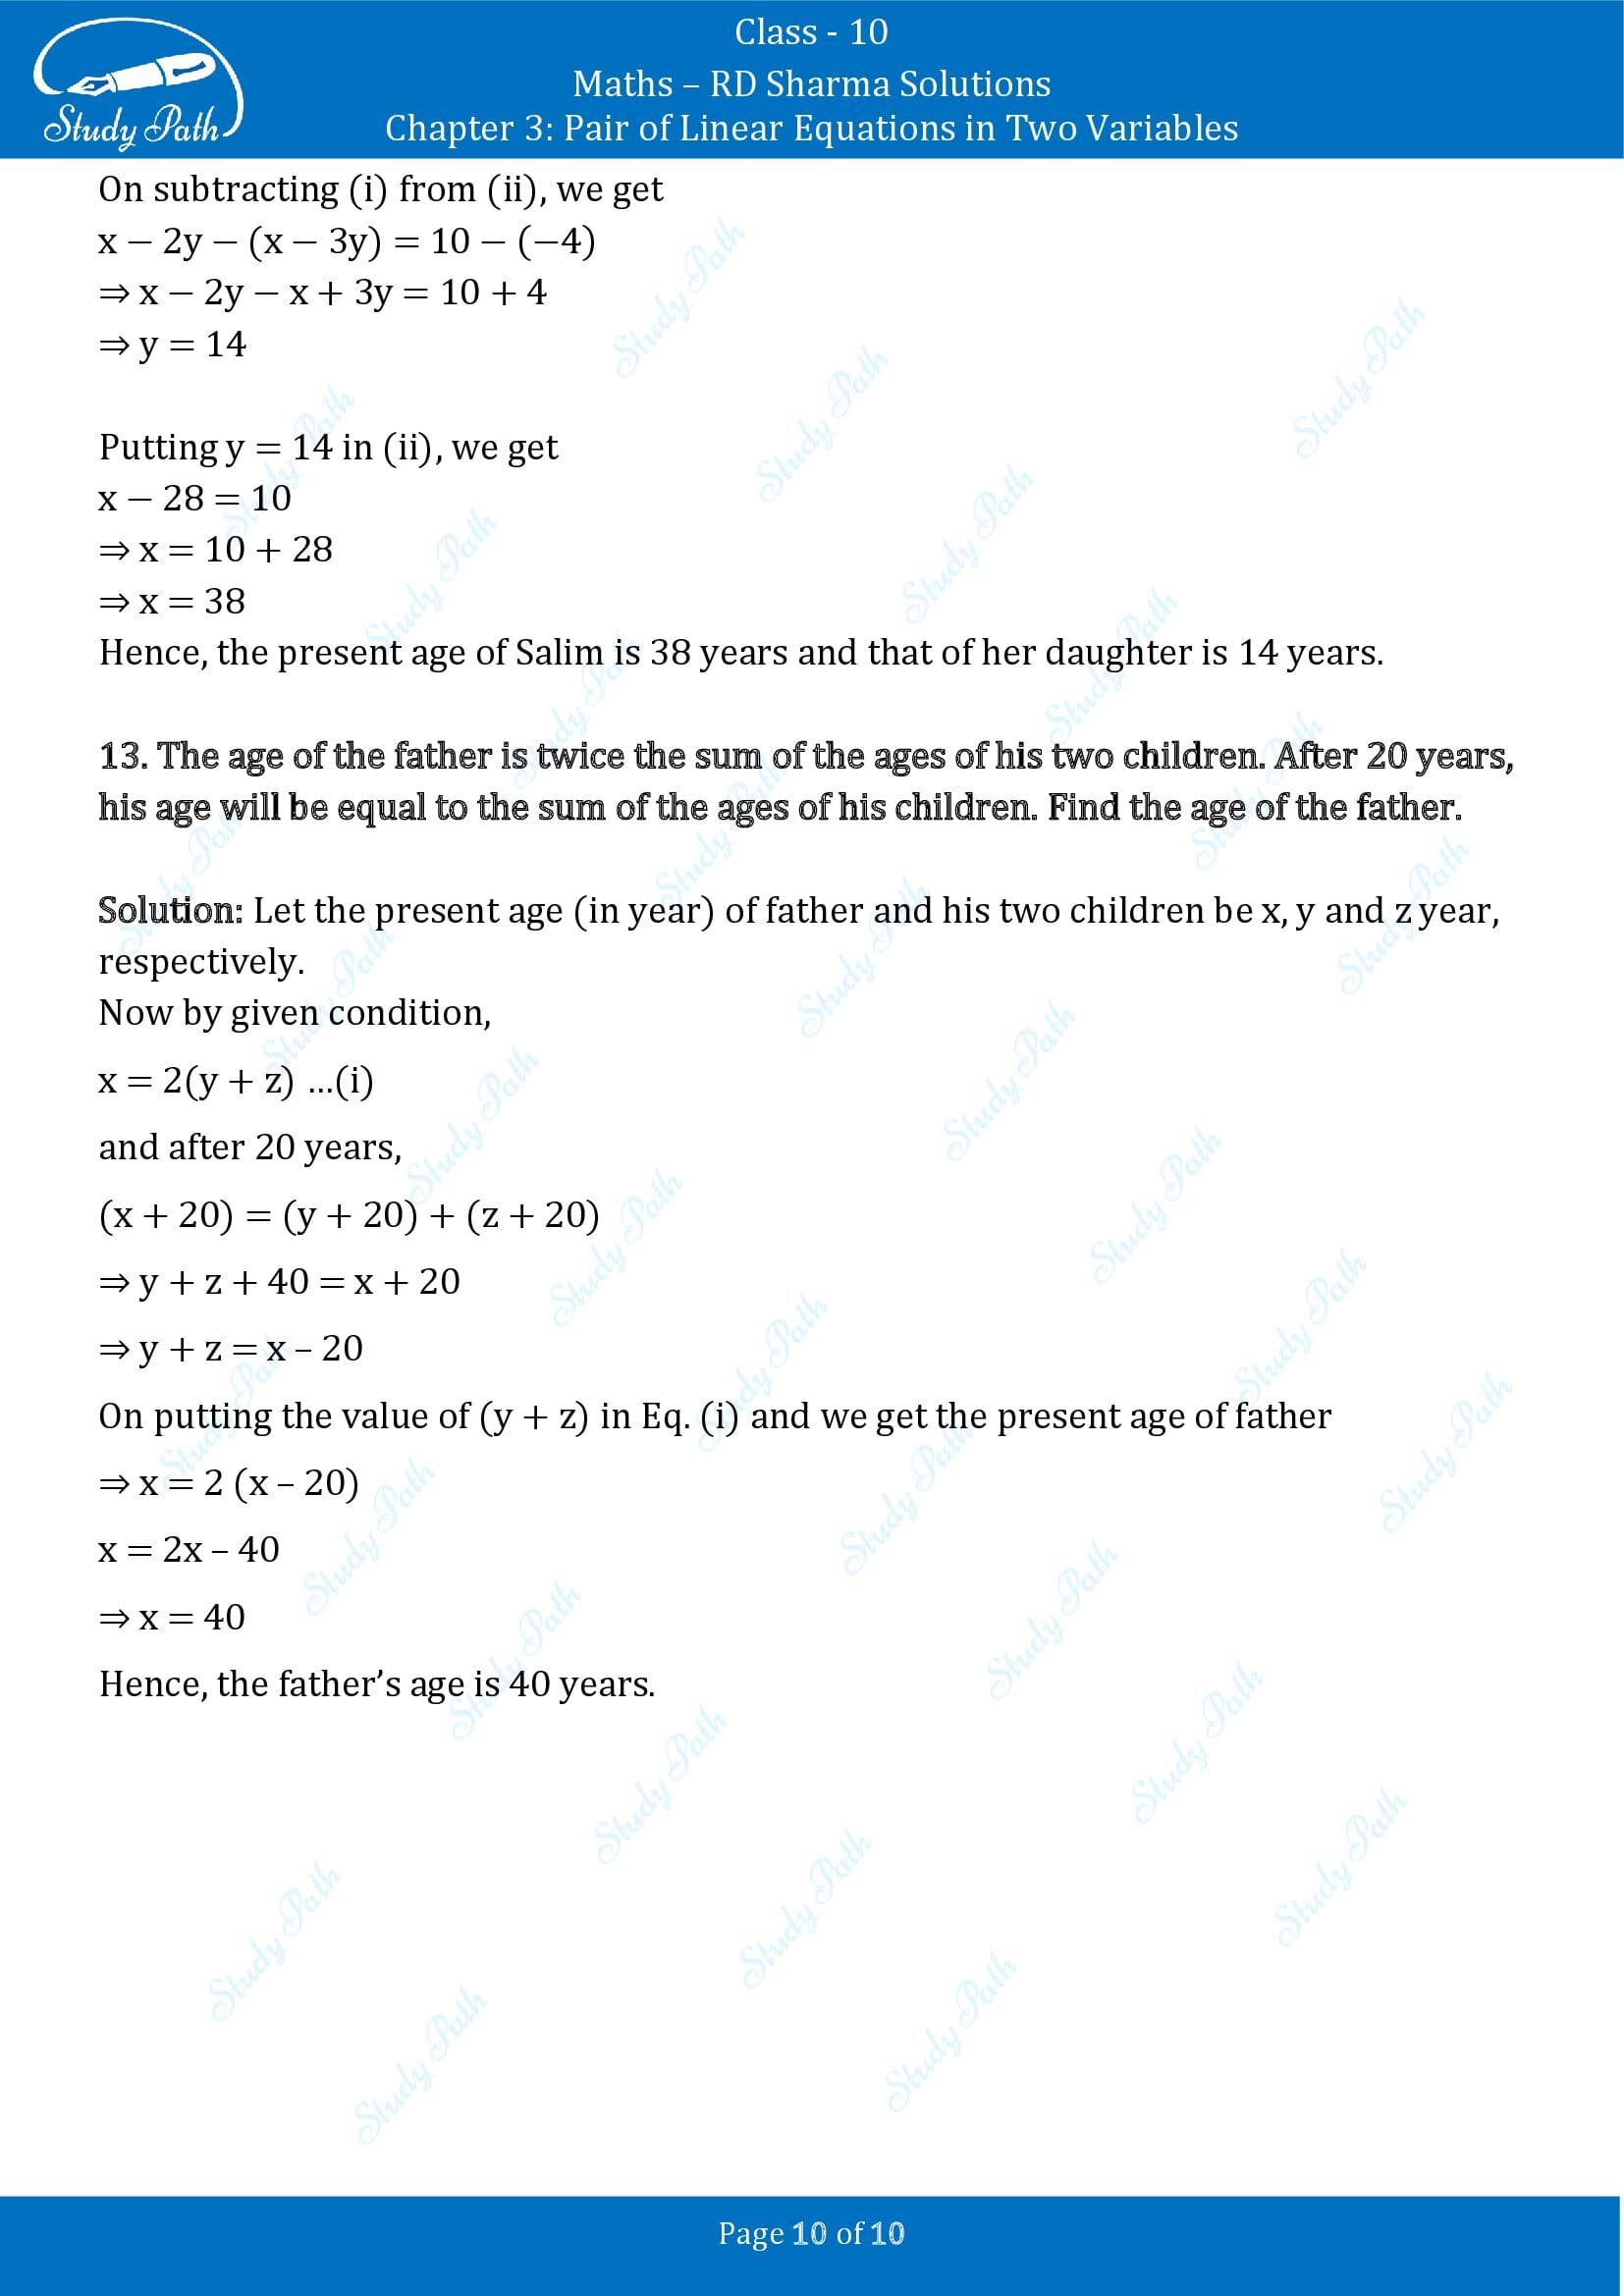 RD Sharma Solutions Class 10 Chapter 3 Pair of Linear Equations in Two Variables Exercise 3.9 00010